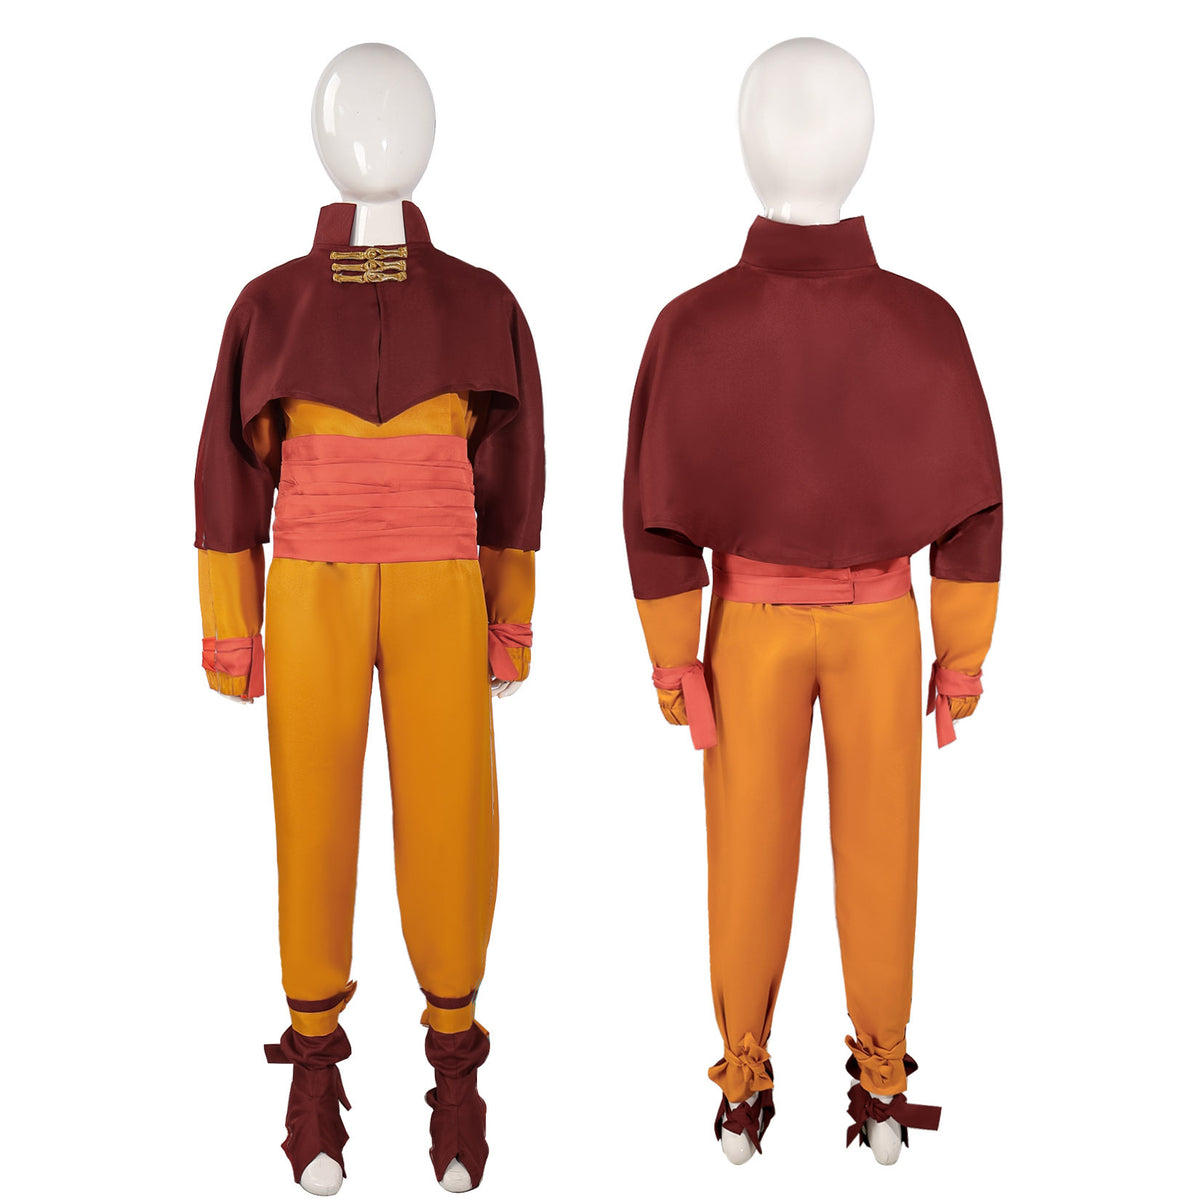 Avatar: The Last Airbender Cosplay Costume